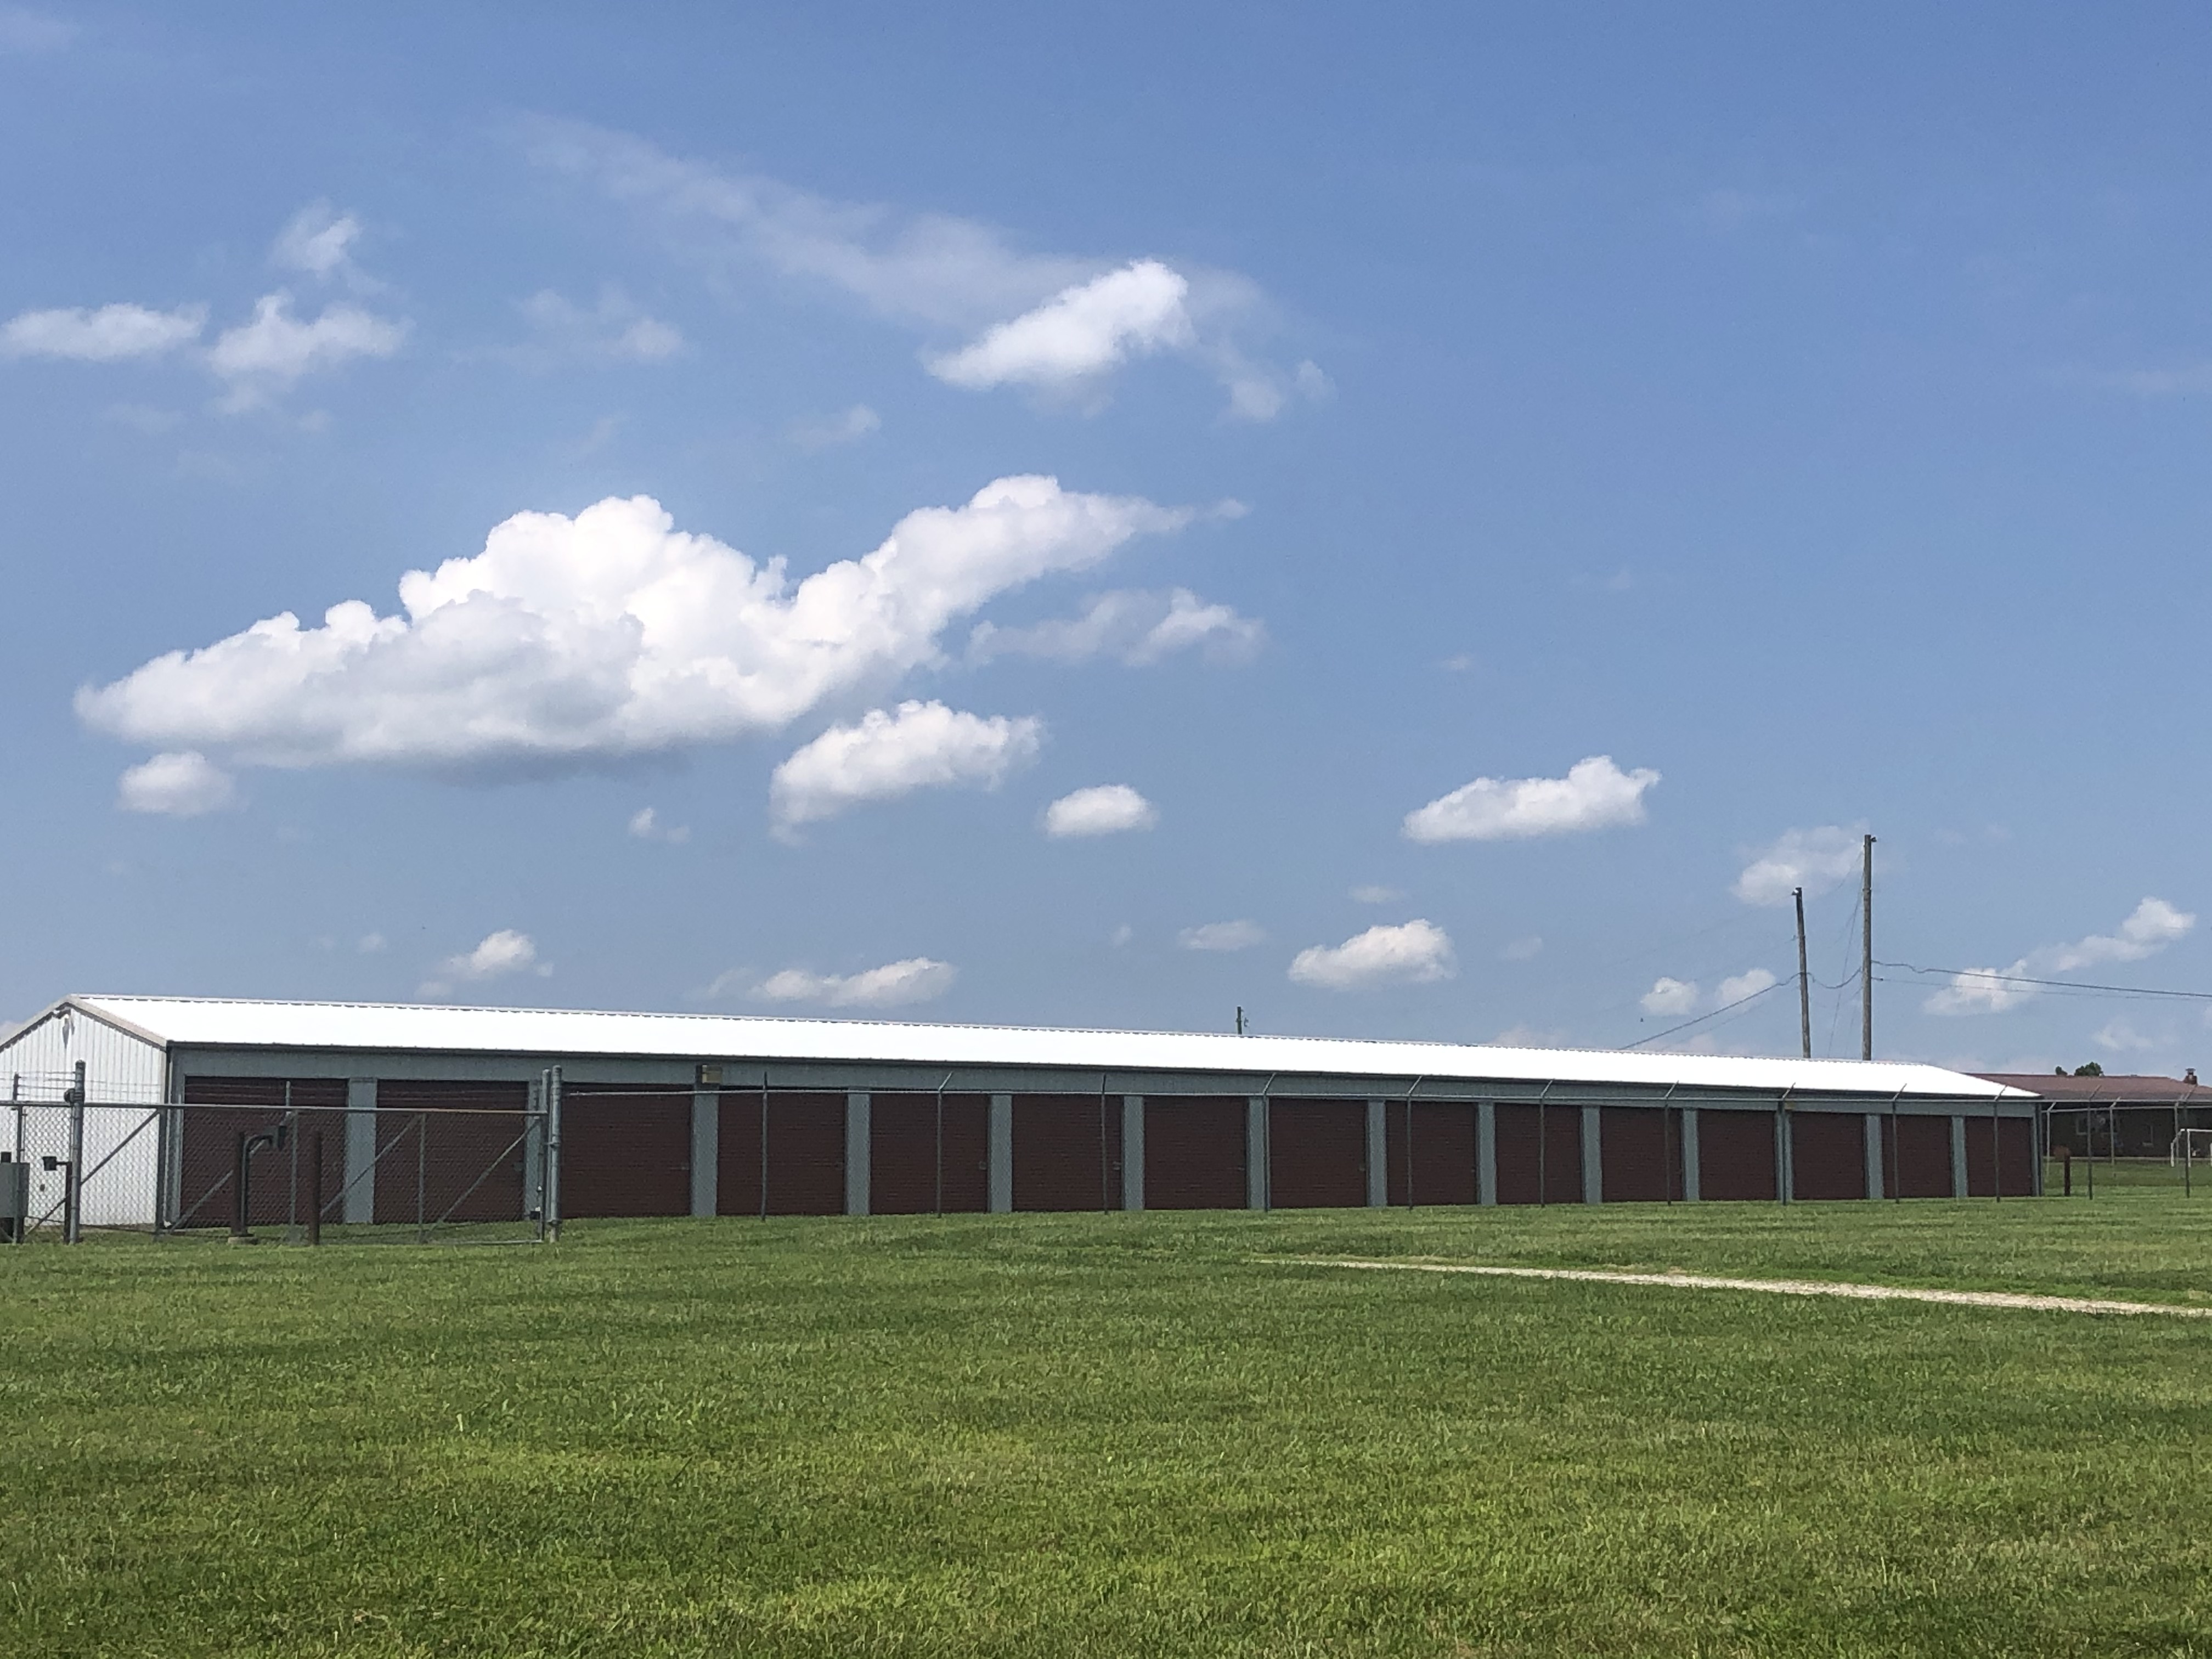 Panoramic view of Superior Storage facility in Wheelersburg, OH, displaying well-maintained grounds and exterior access storage units.